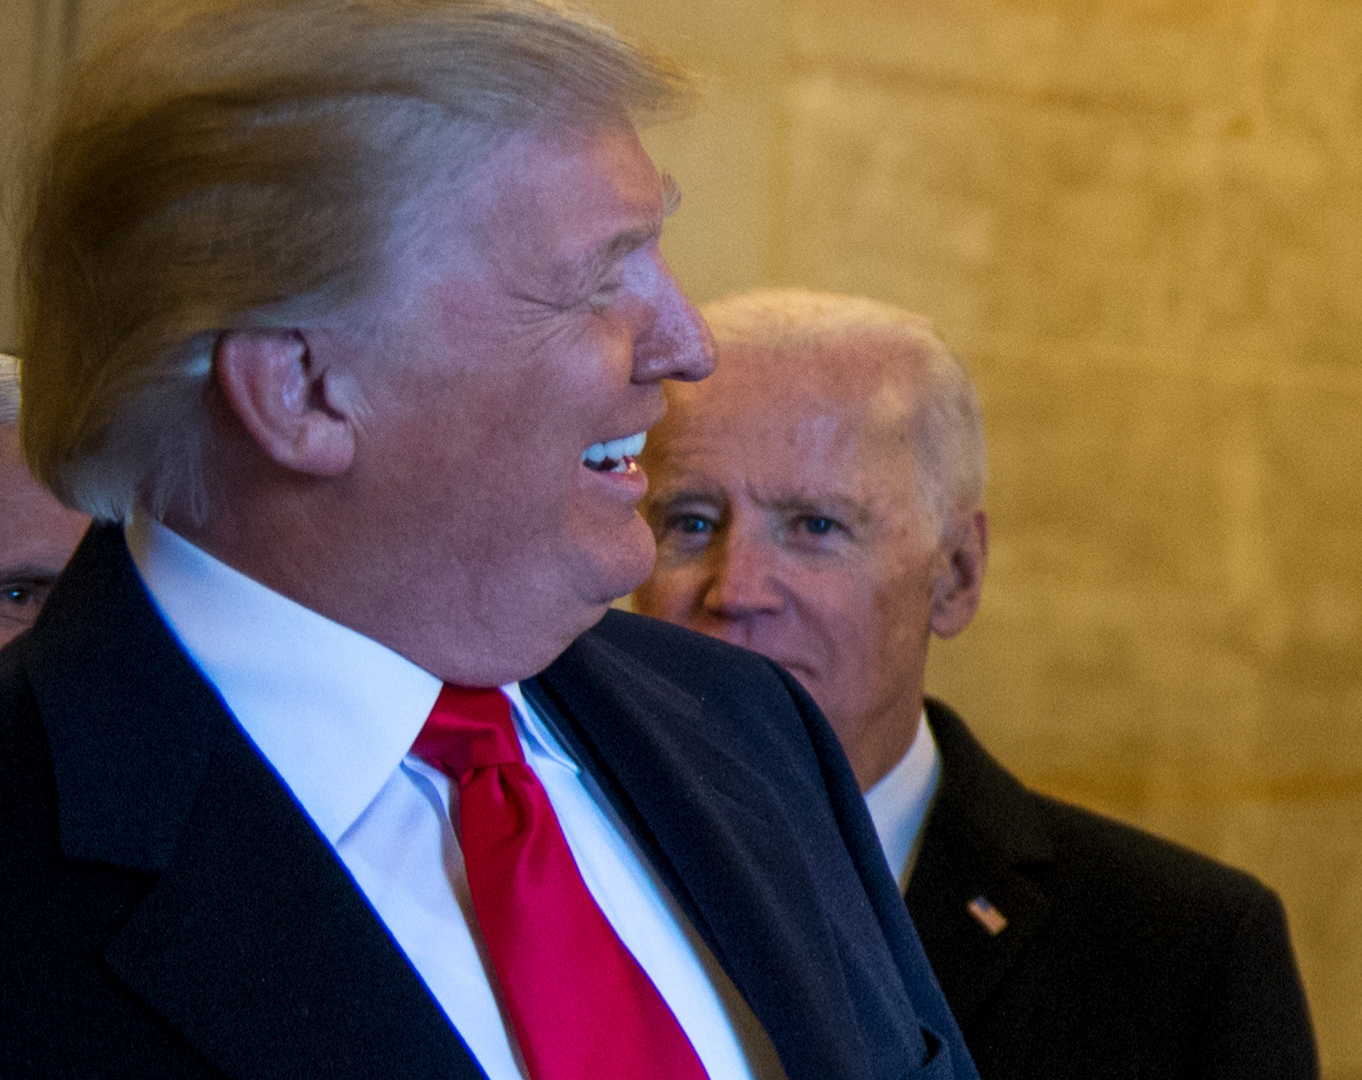 Trump, foreground, in right profile, smiles as Joe Biden, to his left, looks on with an angry frown